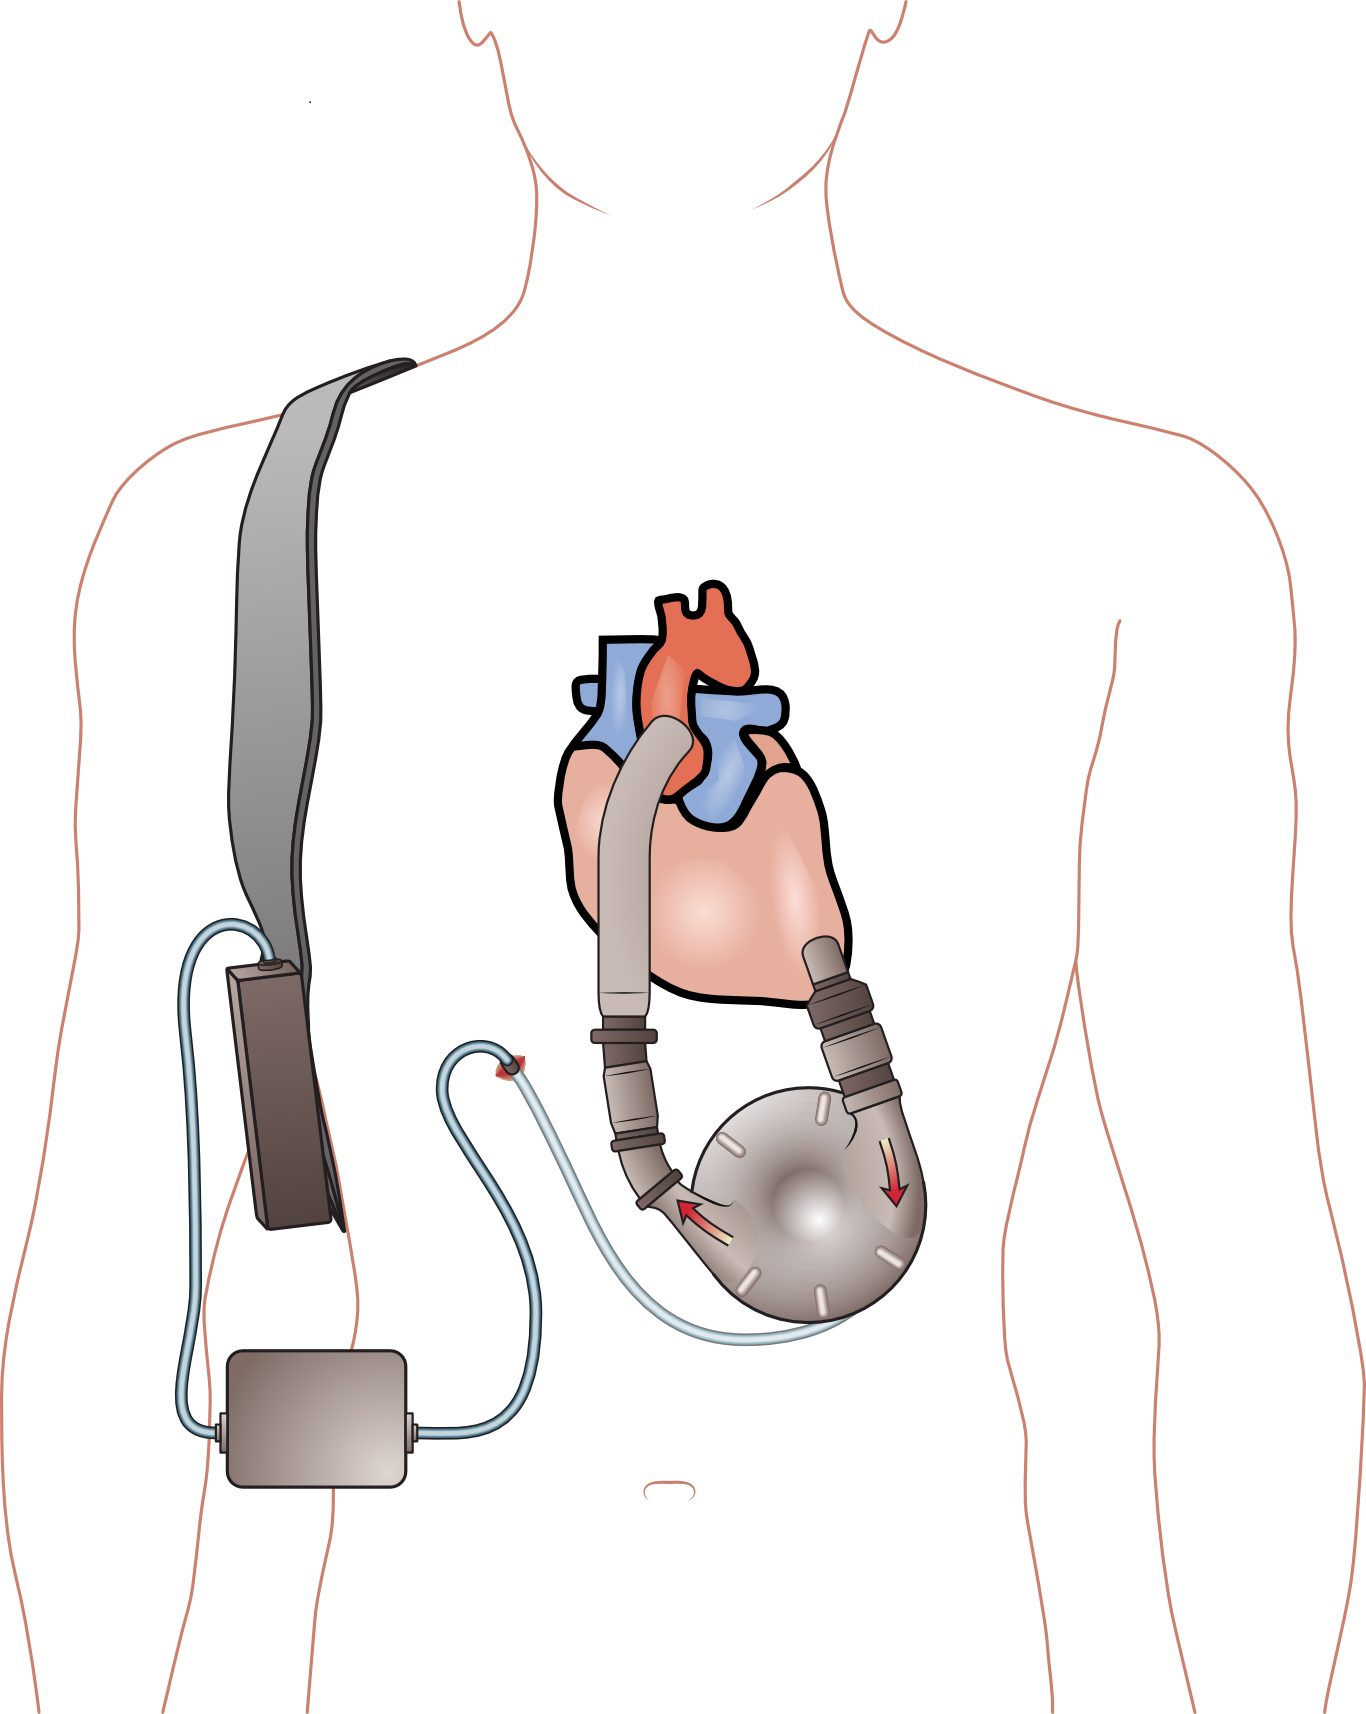 Illustration of Ventricular Assistive Device shows how it's worn and how it connects to the heart.